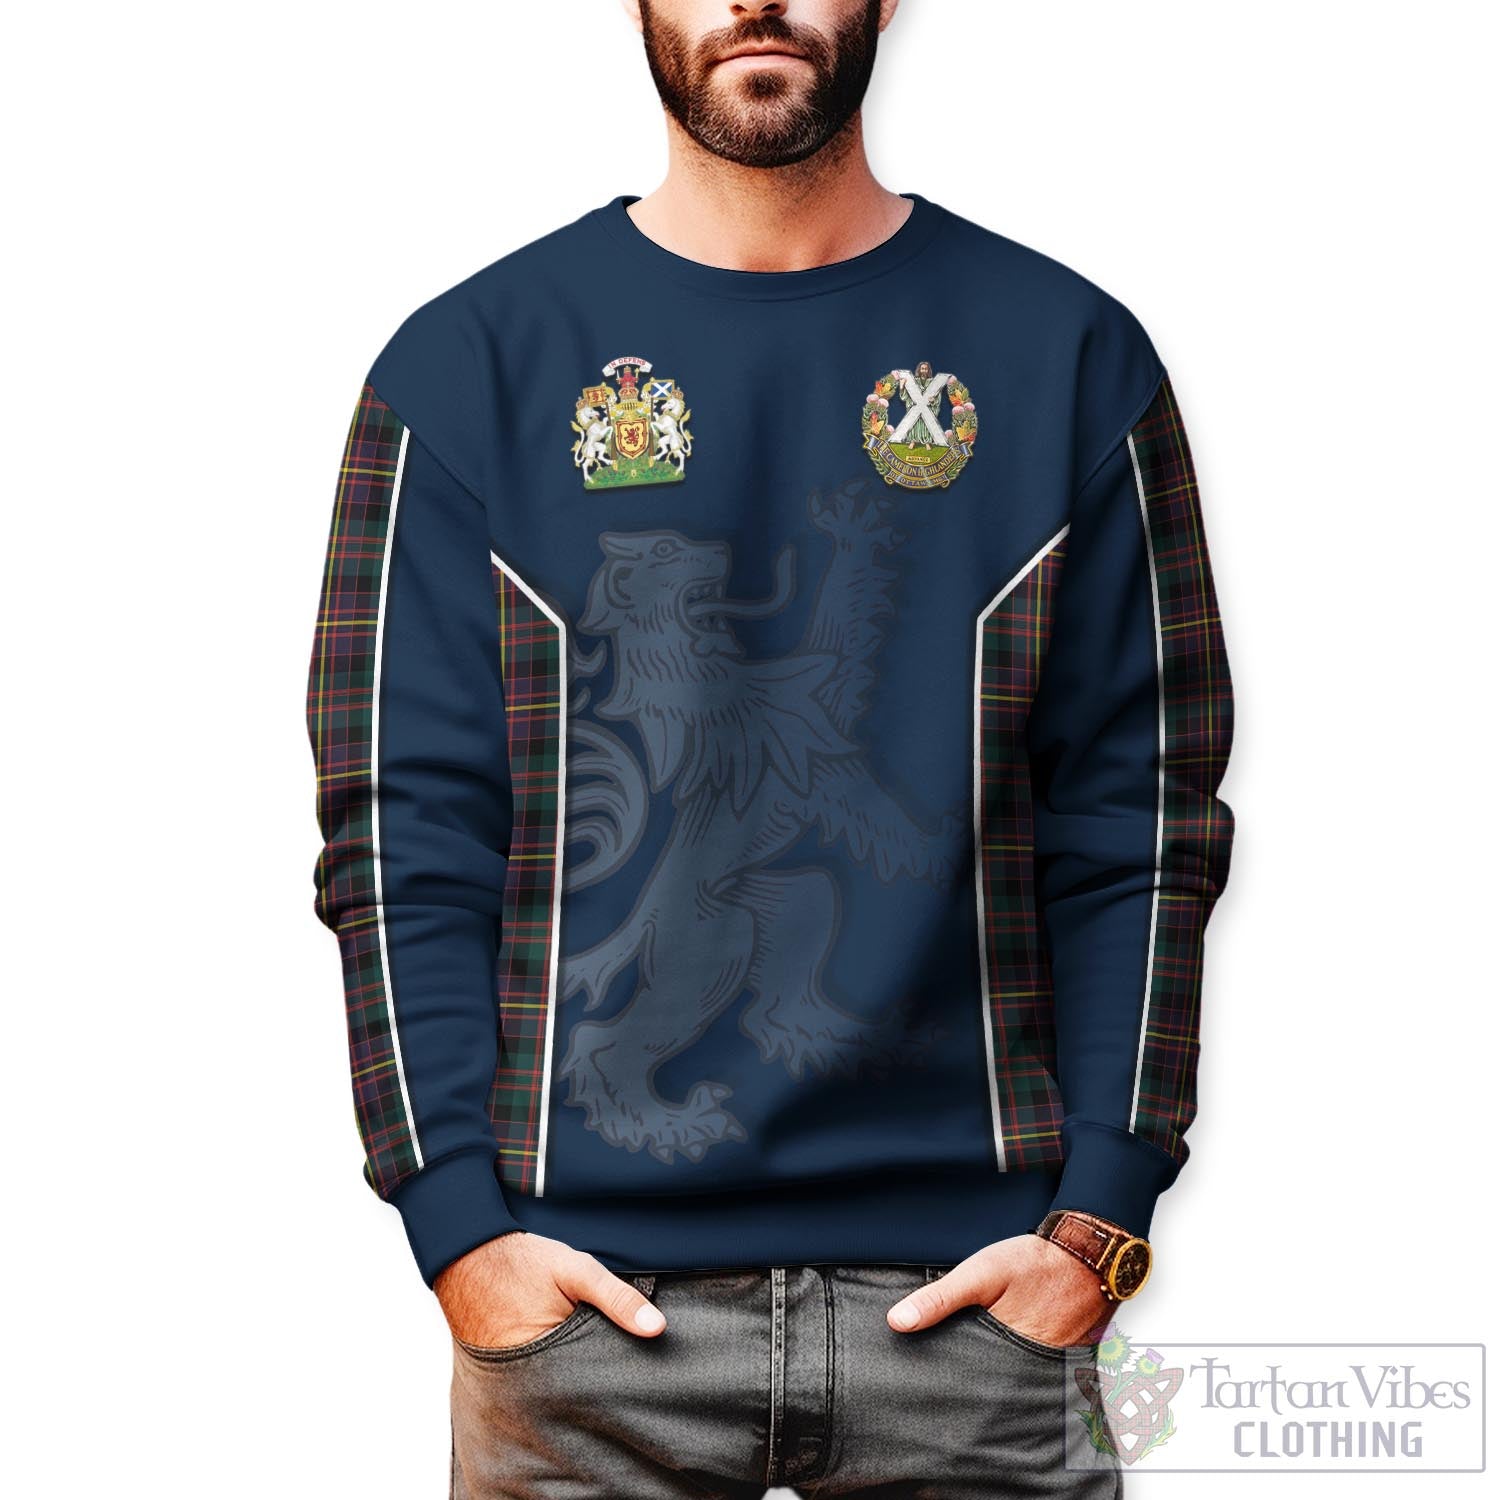 Tartan Vibes Clothing Cameron Highlanders of Ottawa Tartan Sweater with Family Crest and Lion Rampant Vibes Sport Style